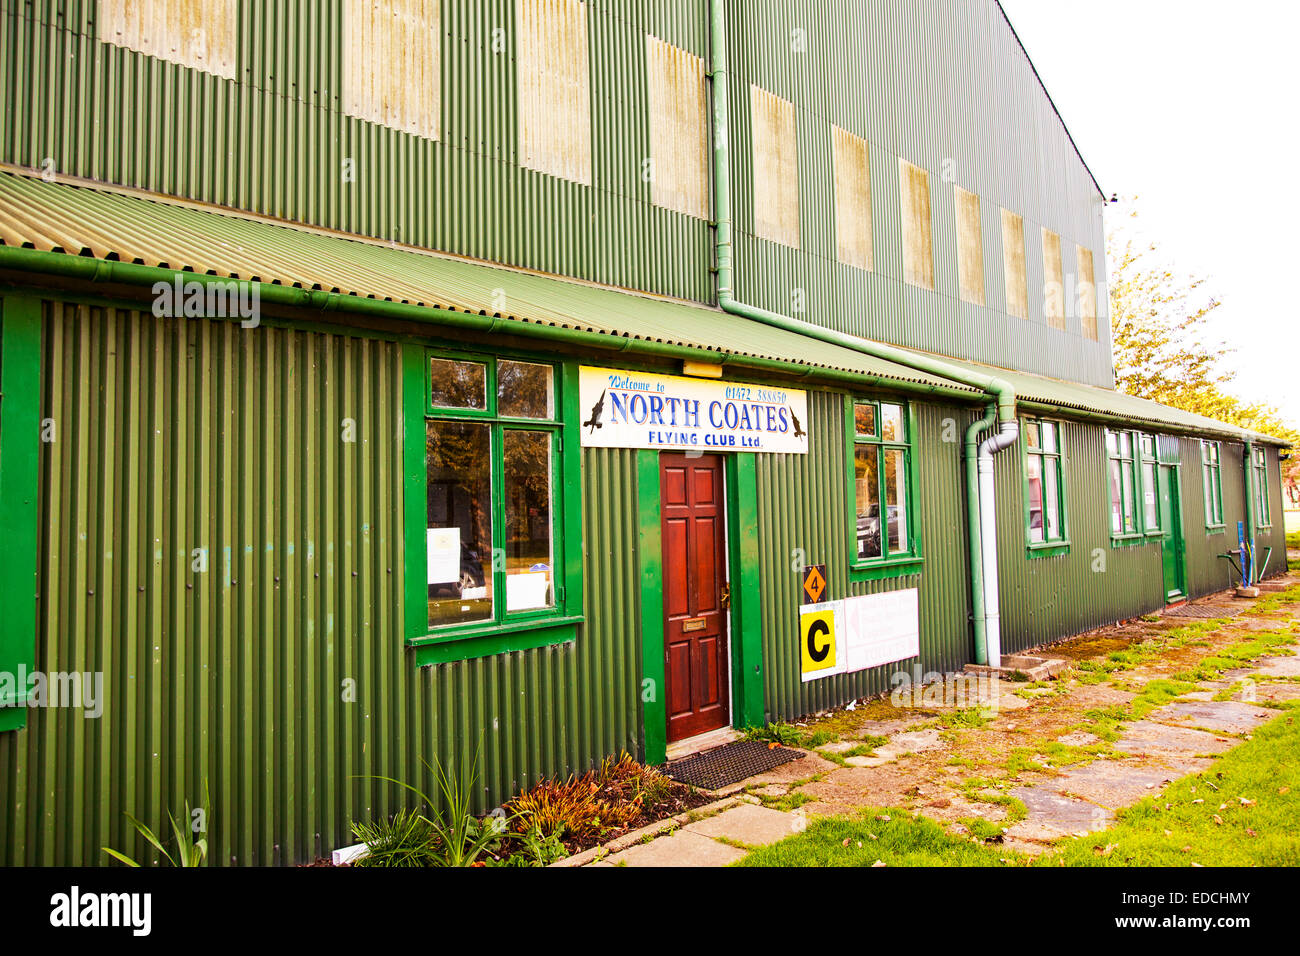 North Coates flying club building sign front entrance Lincolnshire UK England Stock Photo